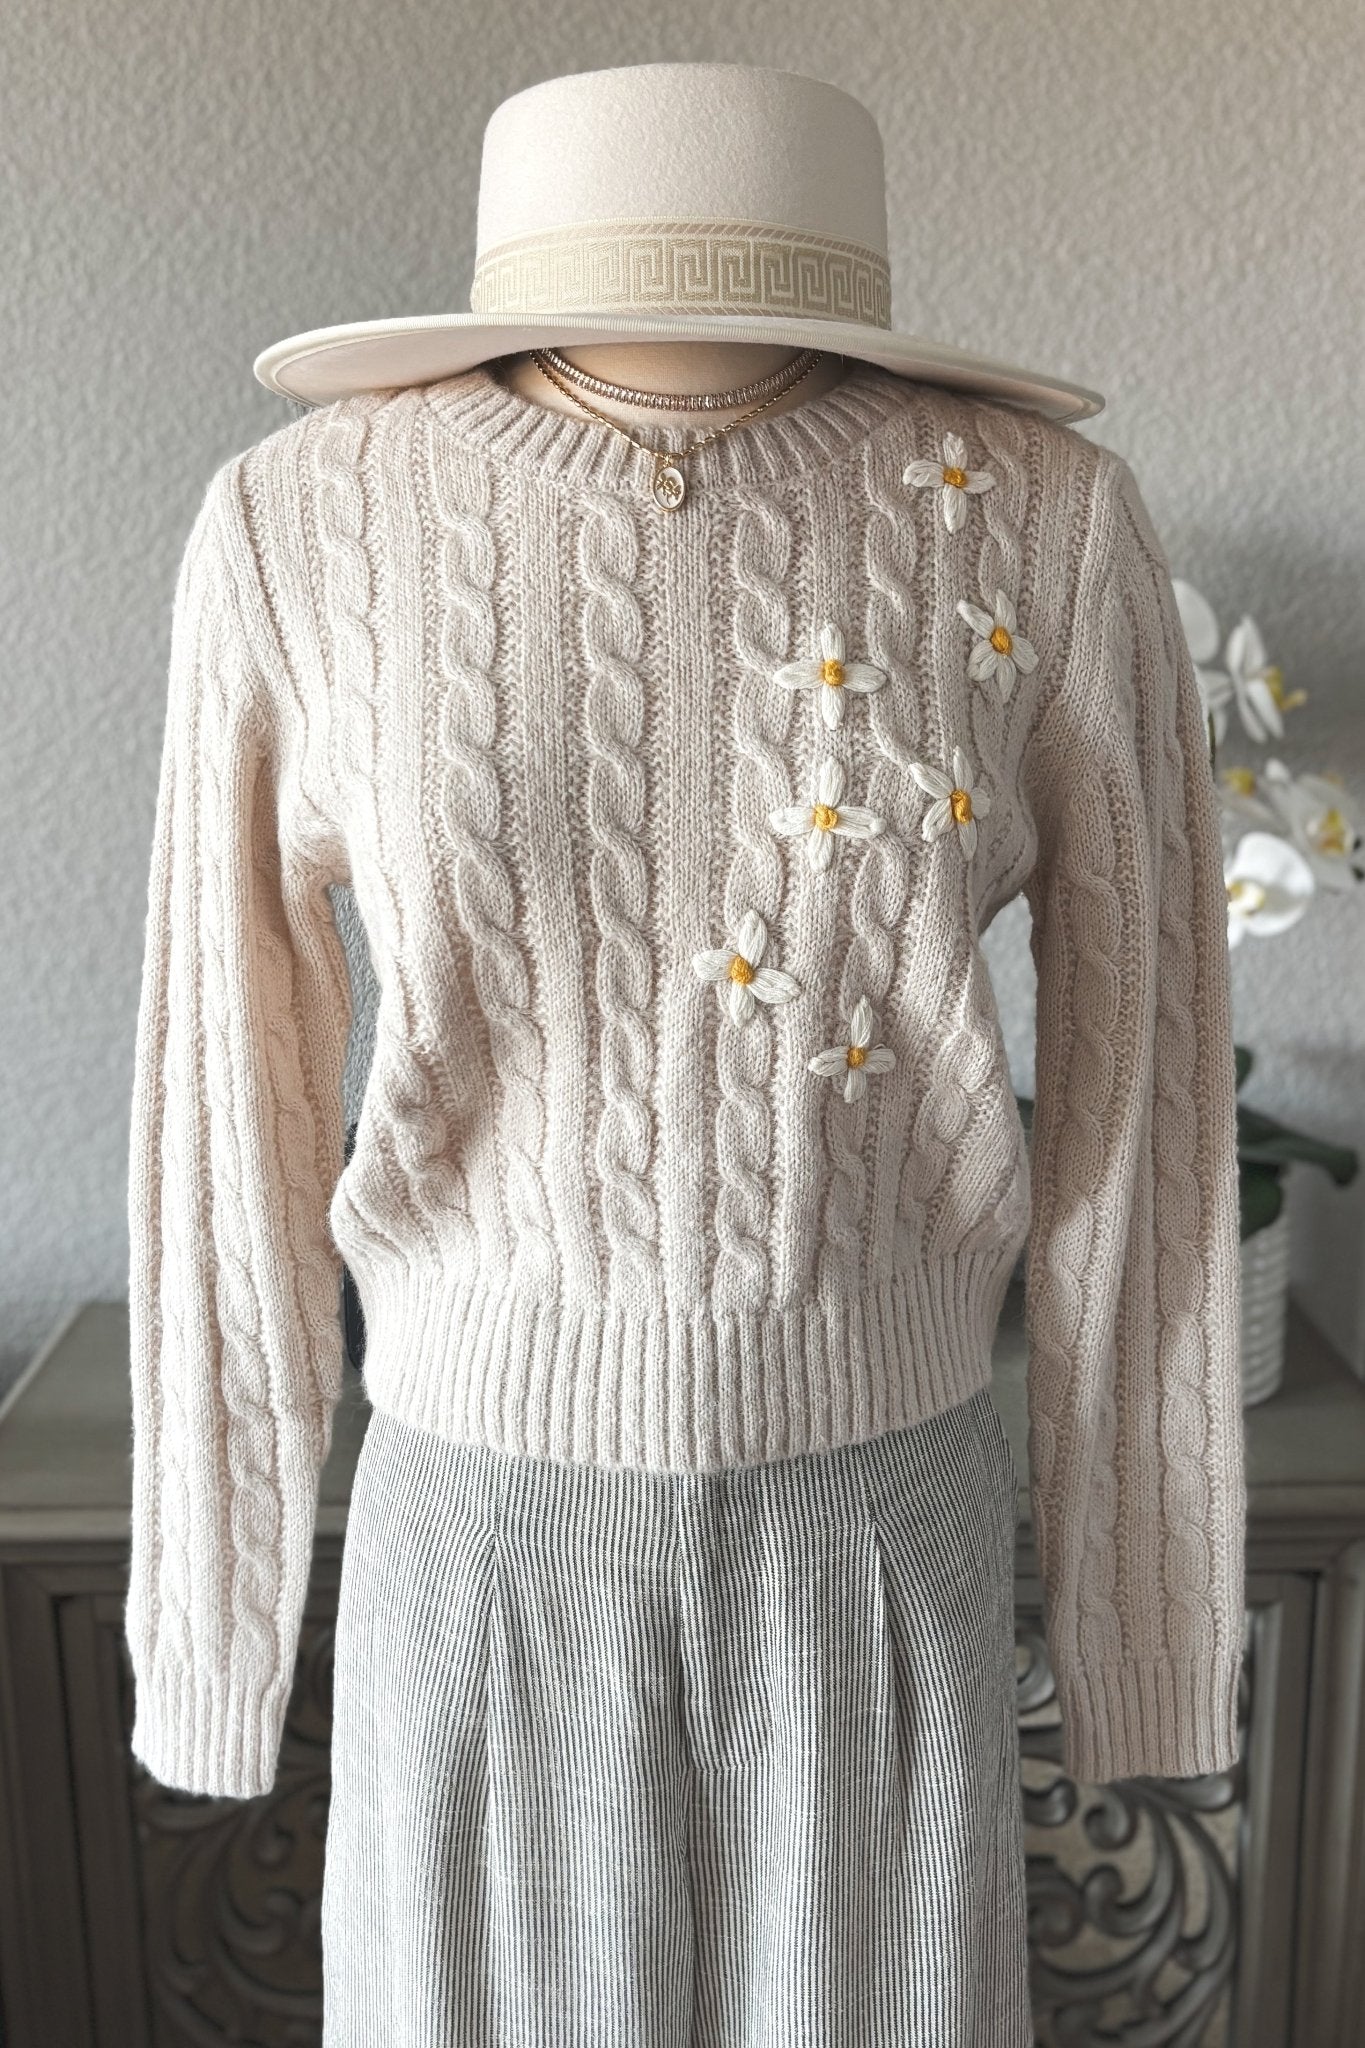 Women's Hand Embroidered Daisy Cable Knit Sweater Top | Natural Ivory - Women's Shirts & Tops - Blooming Daily